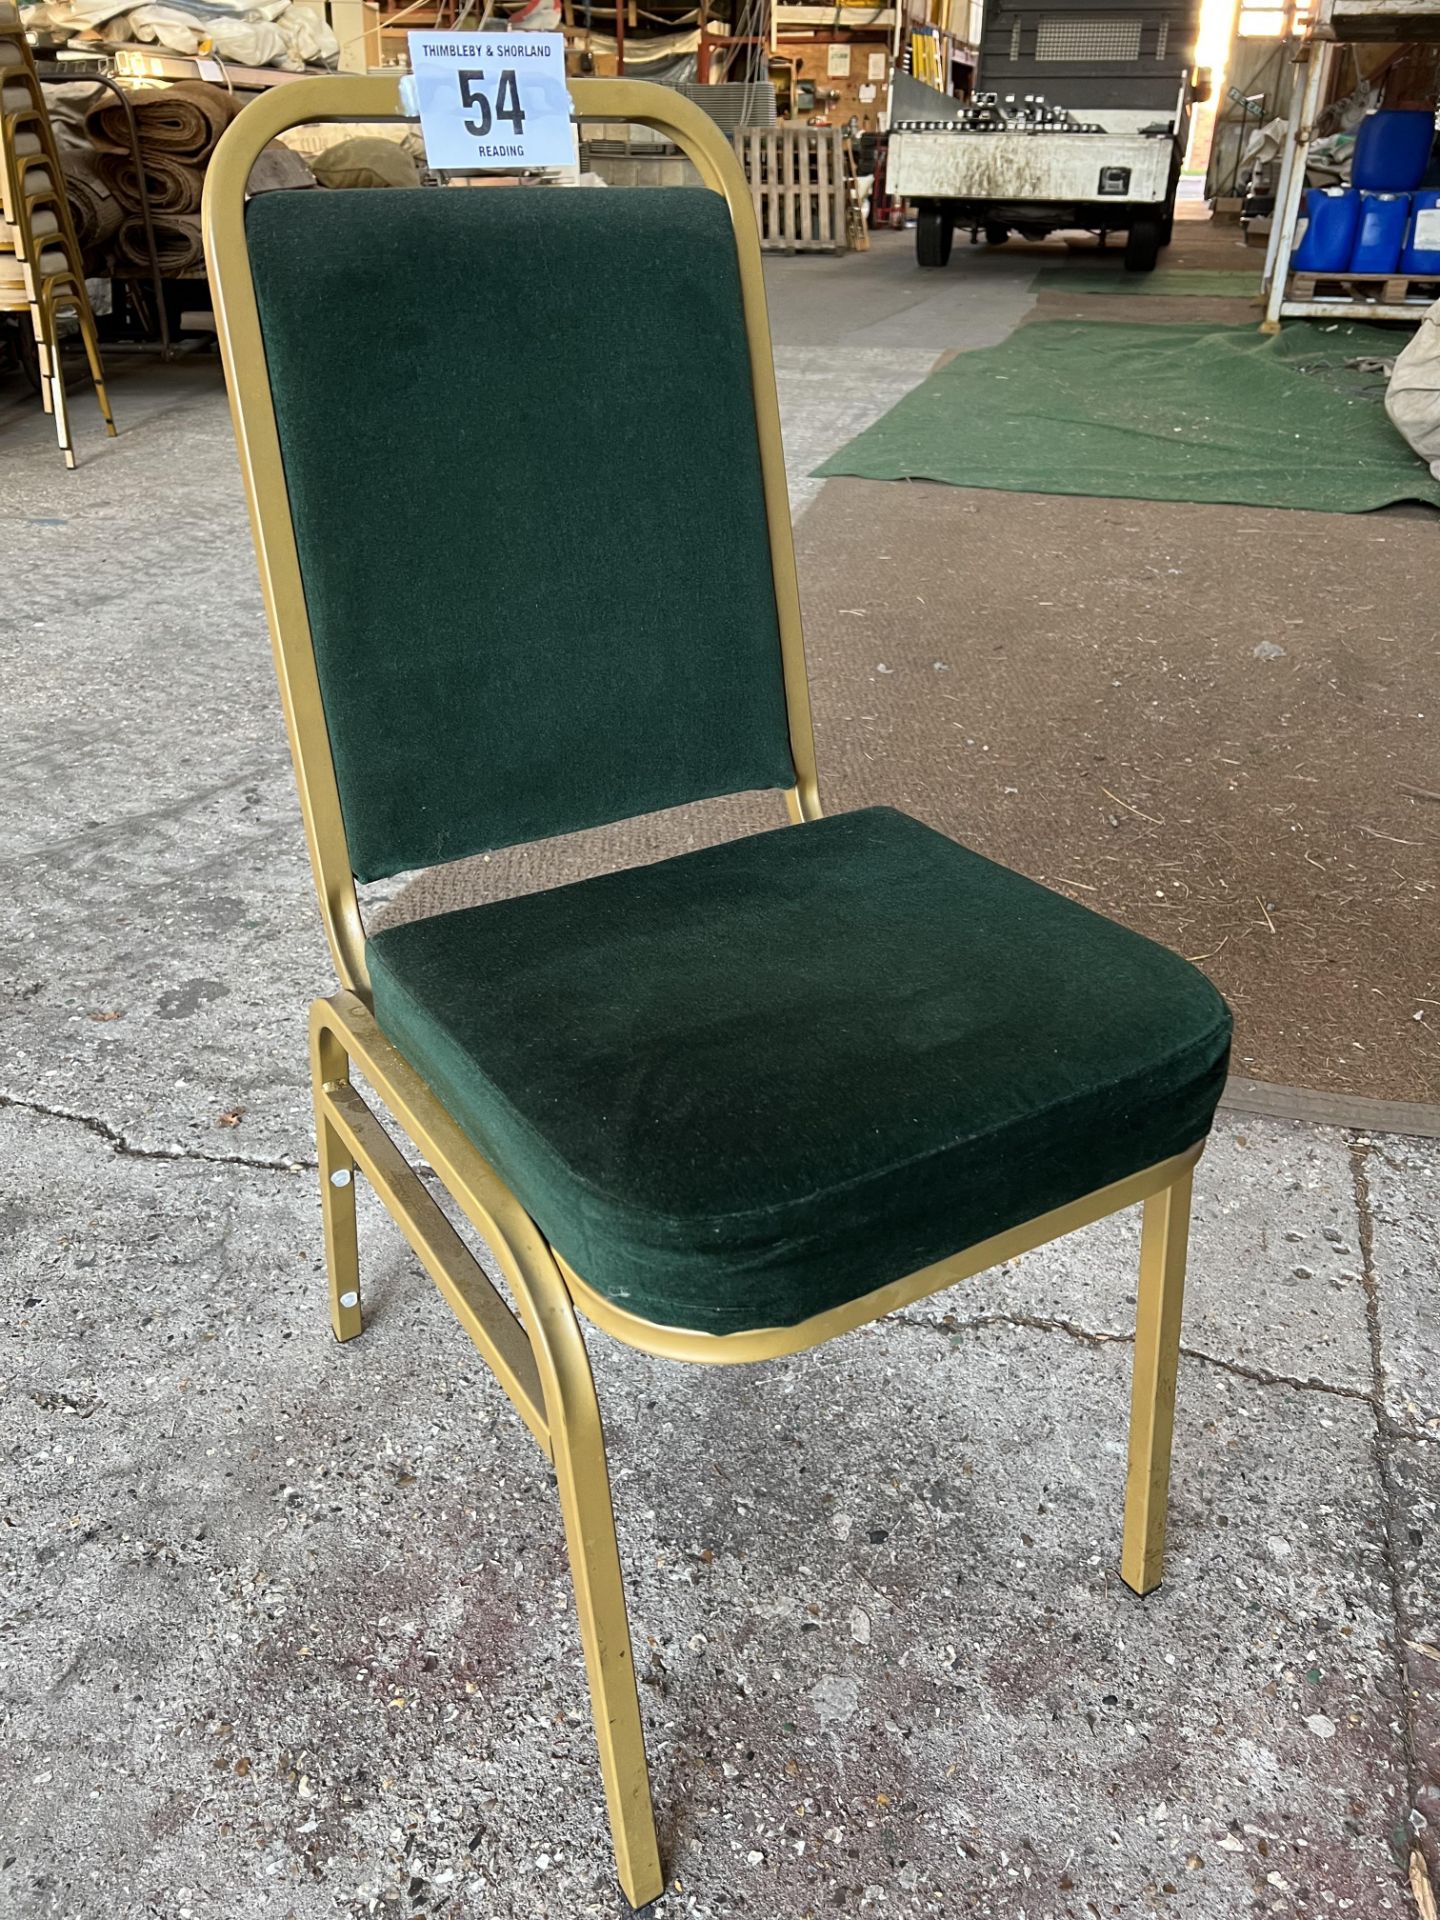 27 banquet chairs with green seat and back. This lot is subject to VAT